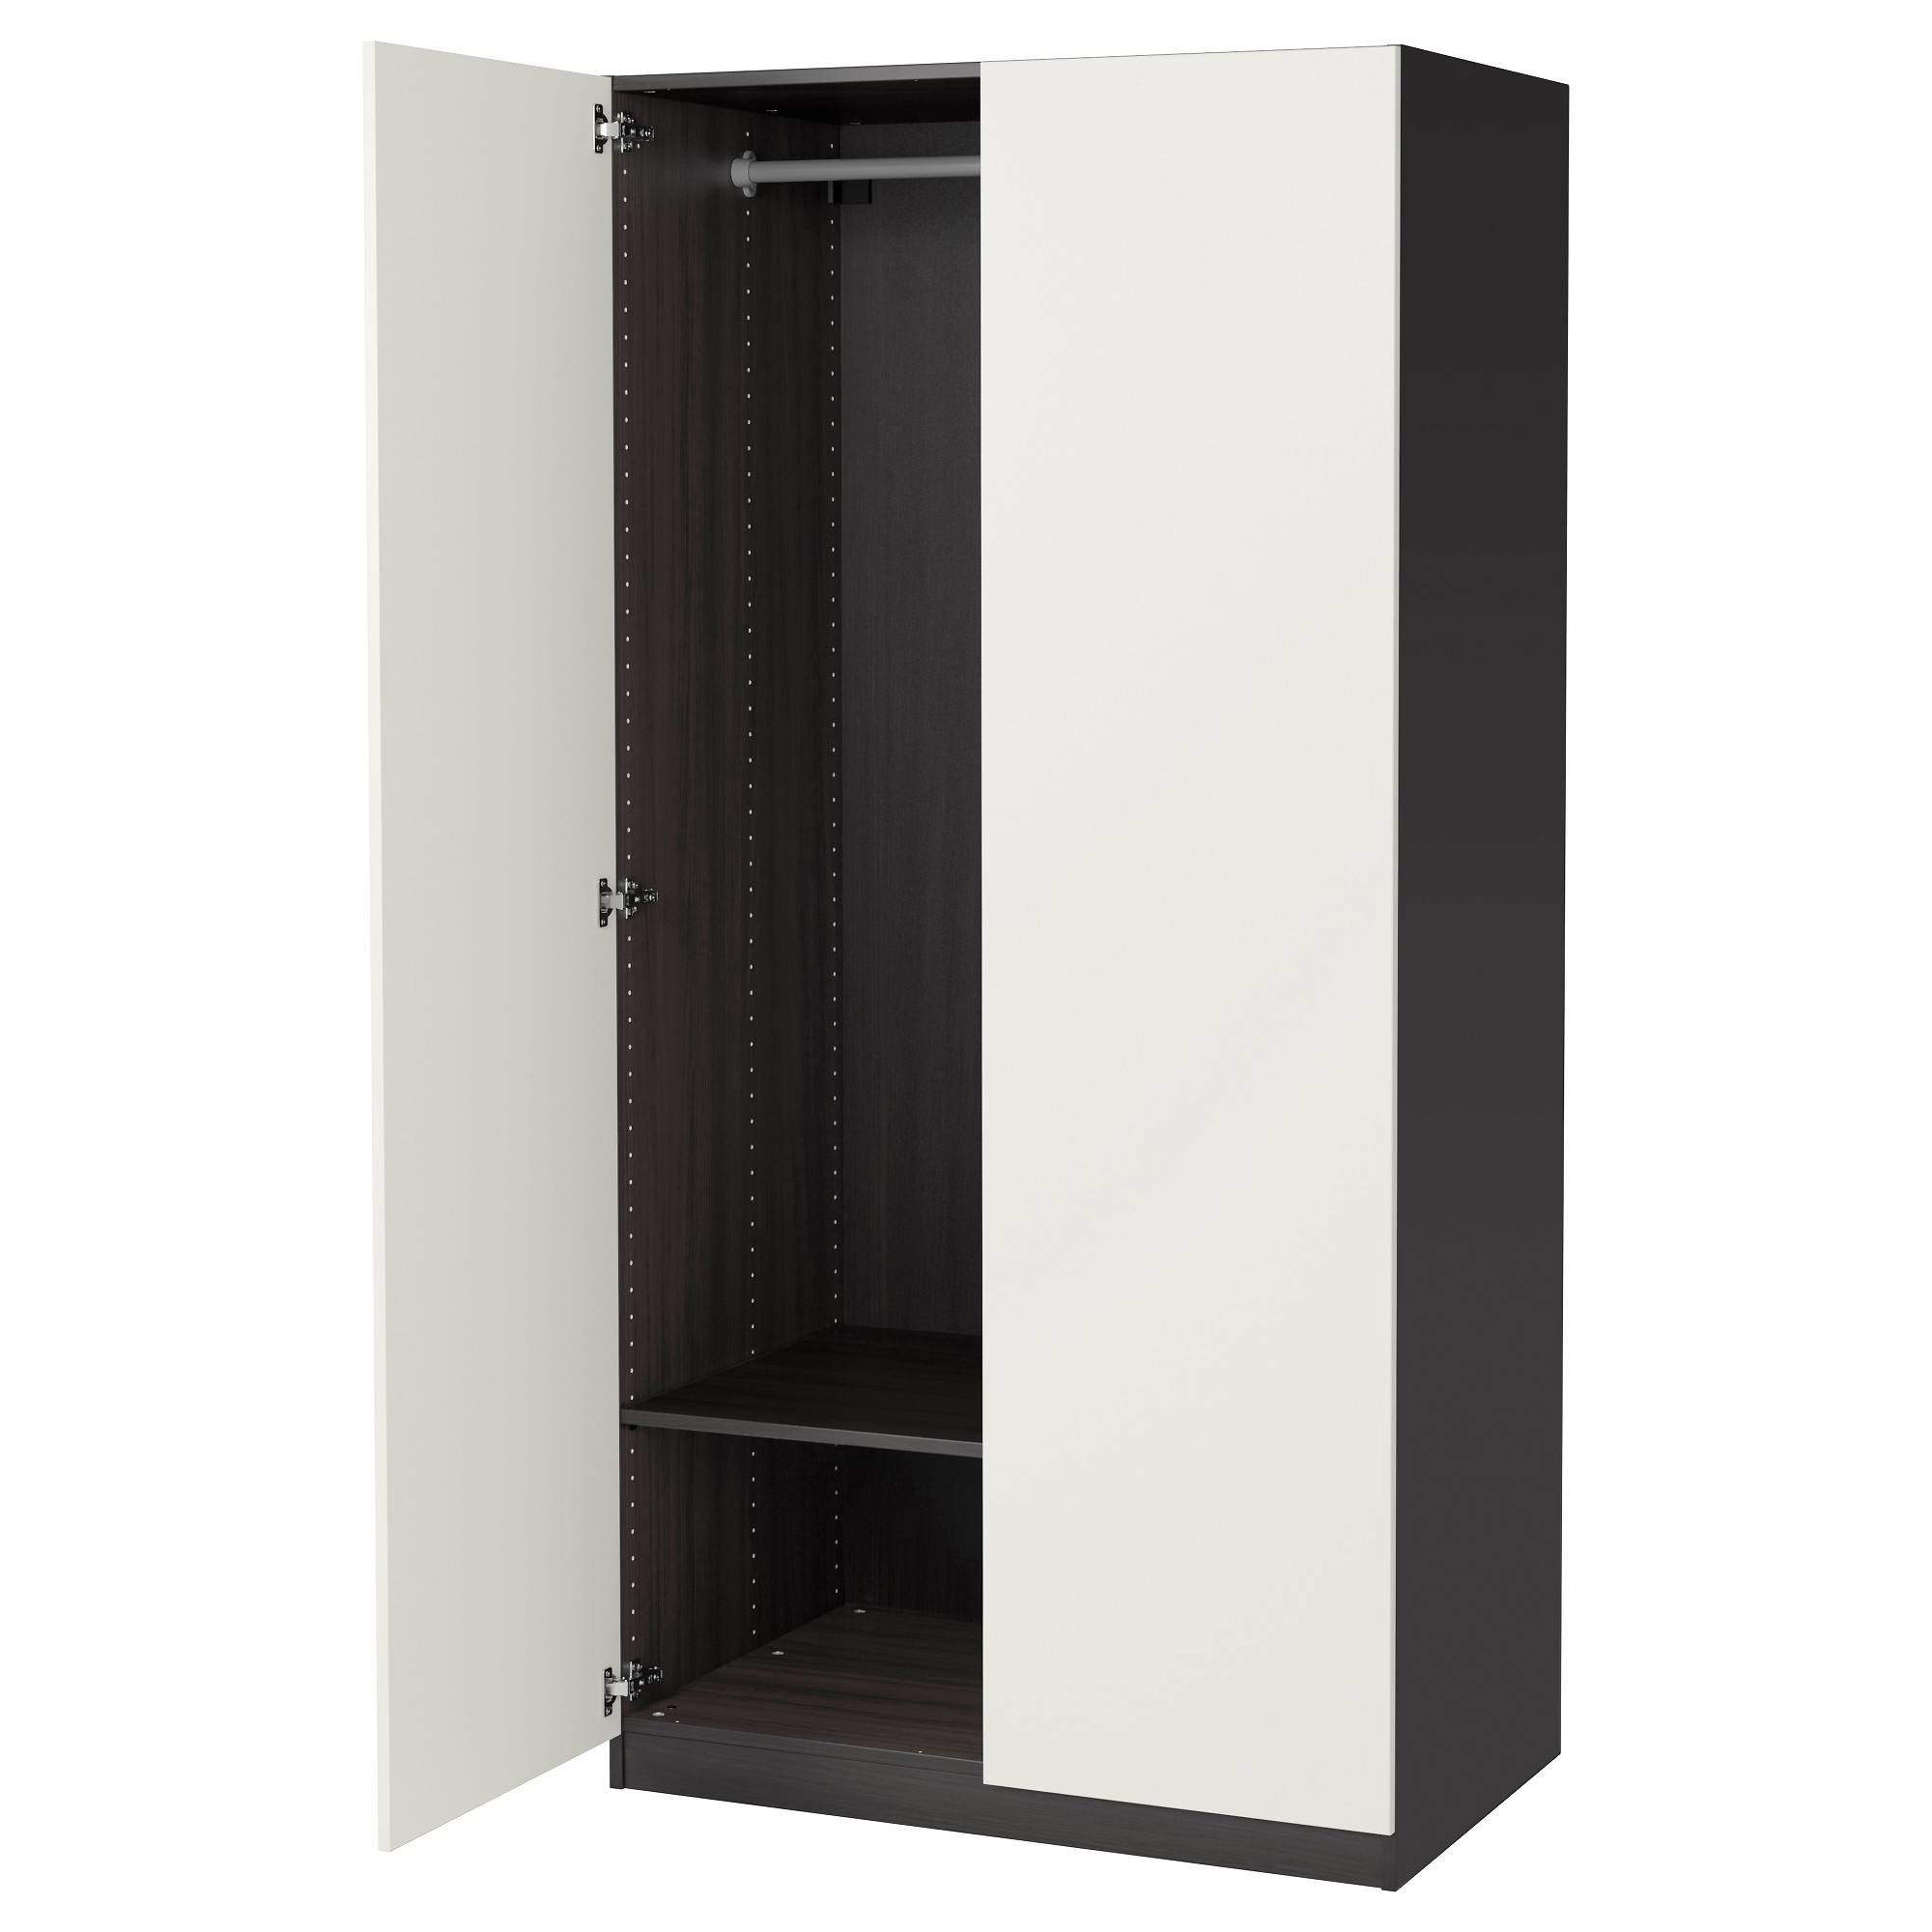 Wardrobes | Ikea Intended For Bargain Wardrobes (View 13 of 15)